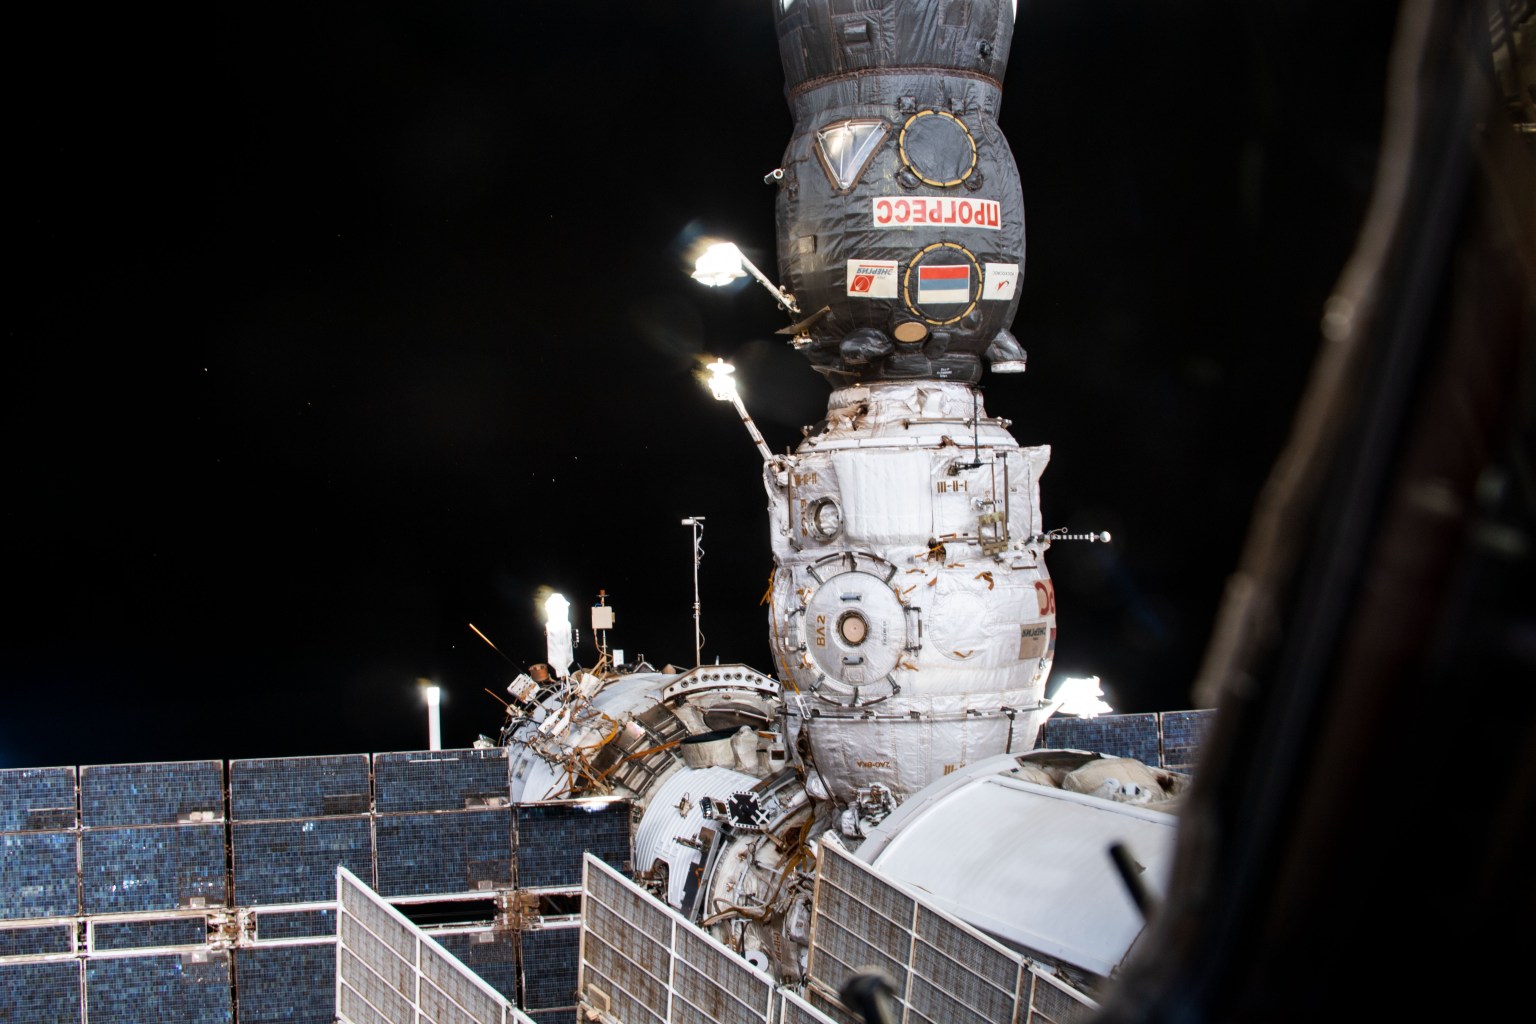 Russia's ISS Progress 77 (77P) cargo craft is pictured docked to the Pirs docking compartment on the International Space Station's Russian segment. The 77P will remove Pirs from the Zarya service module's Earth-facing port later this summer after 20 years attached to the orbiting lab opening up the port for Russia's new Nauka multipurpose laboratory module due to arrive shortly afterward.